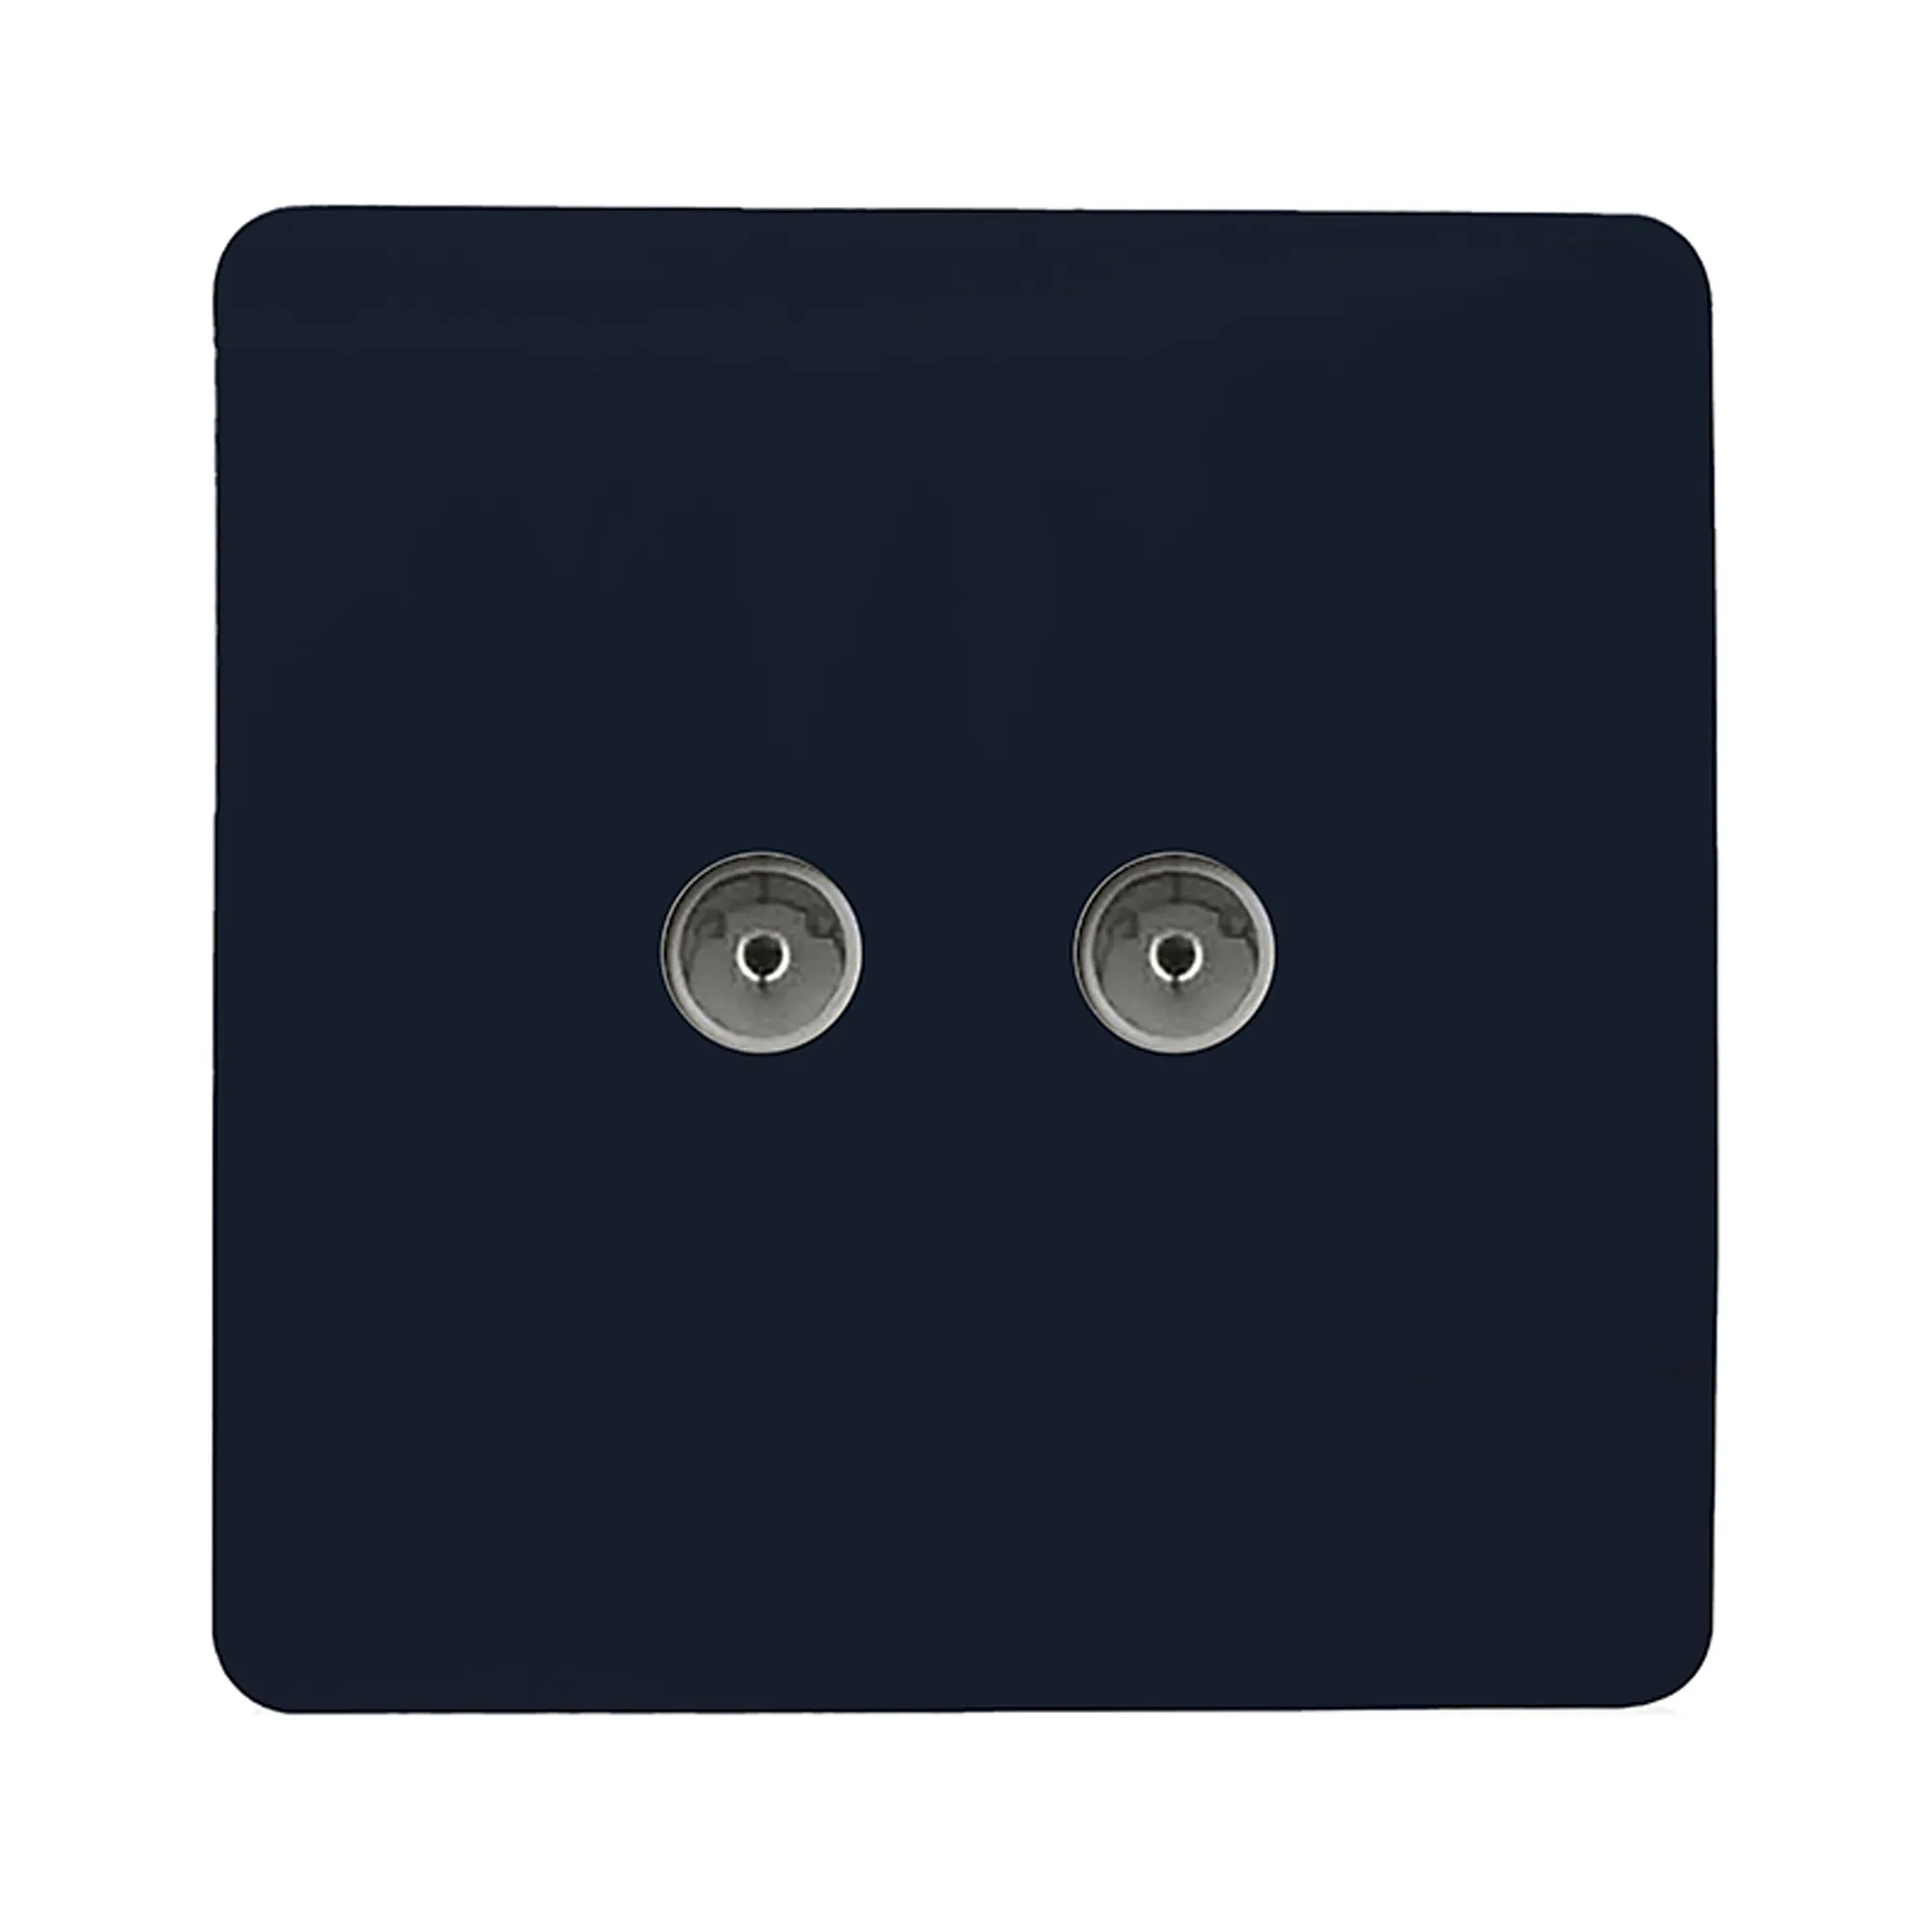 Twin TV Co-Axial Outlet Navy Blue